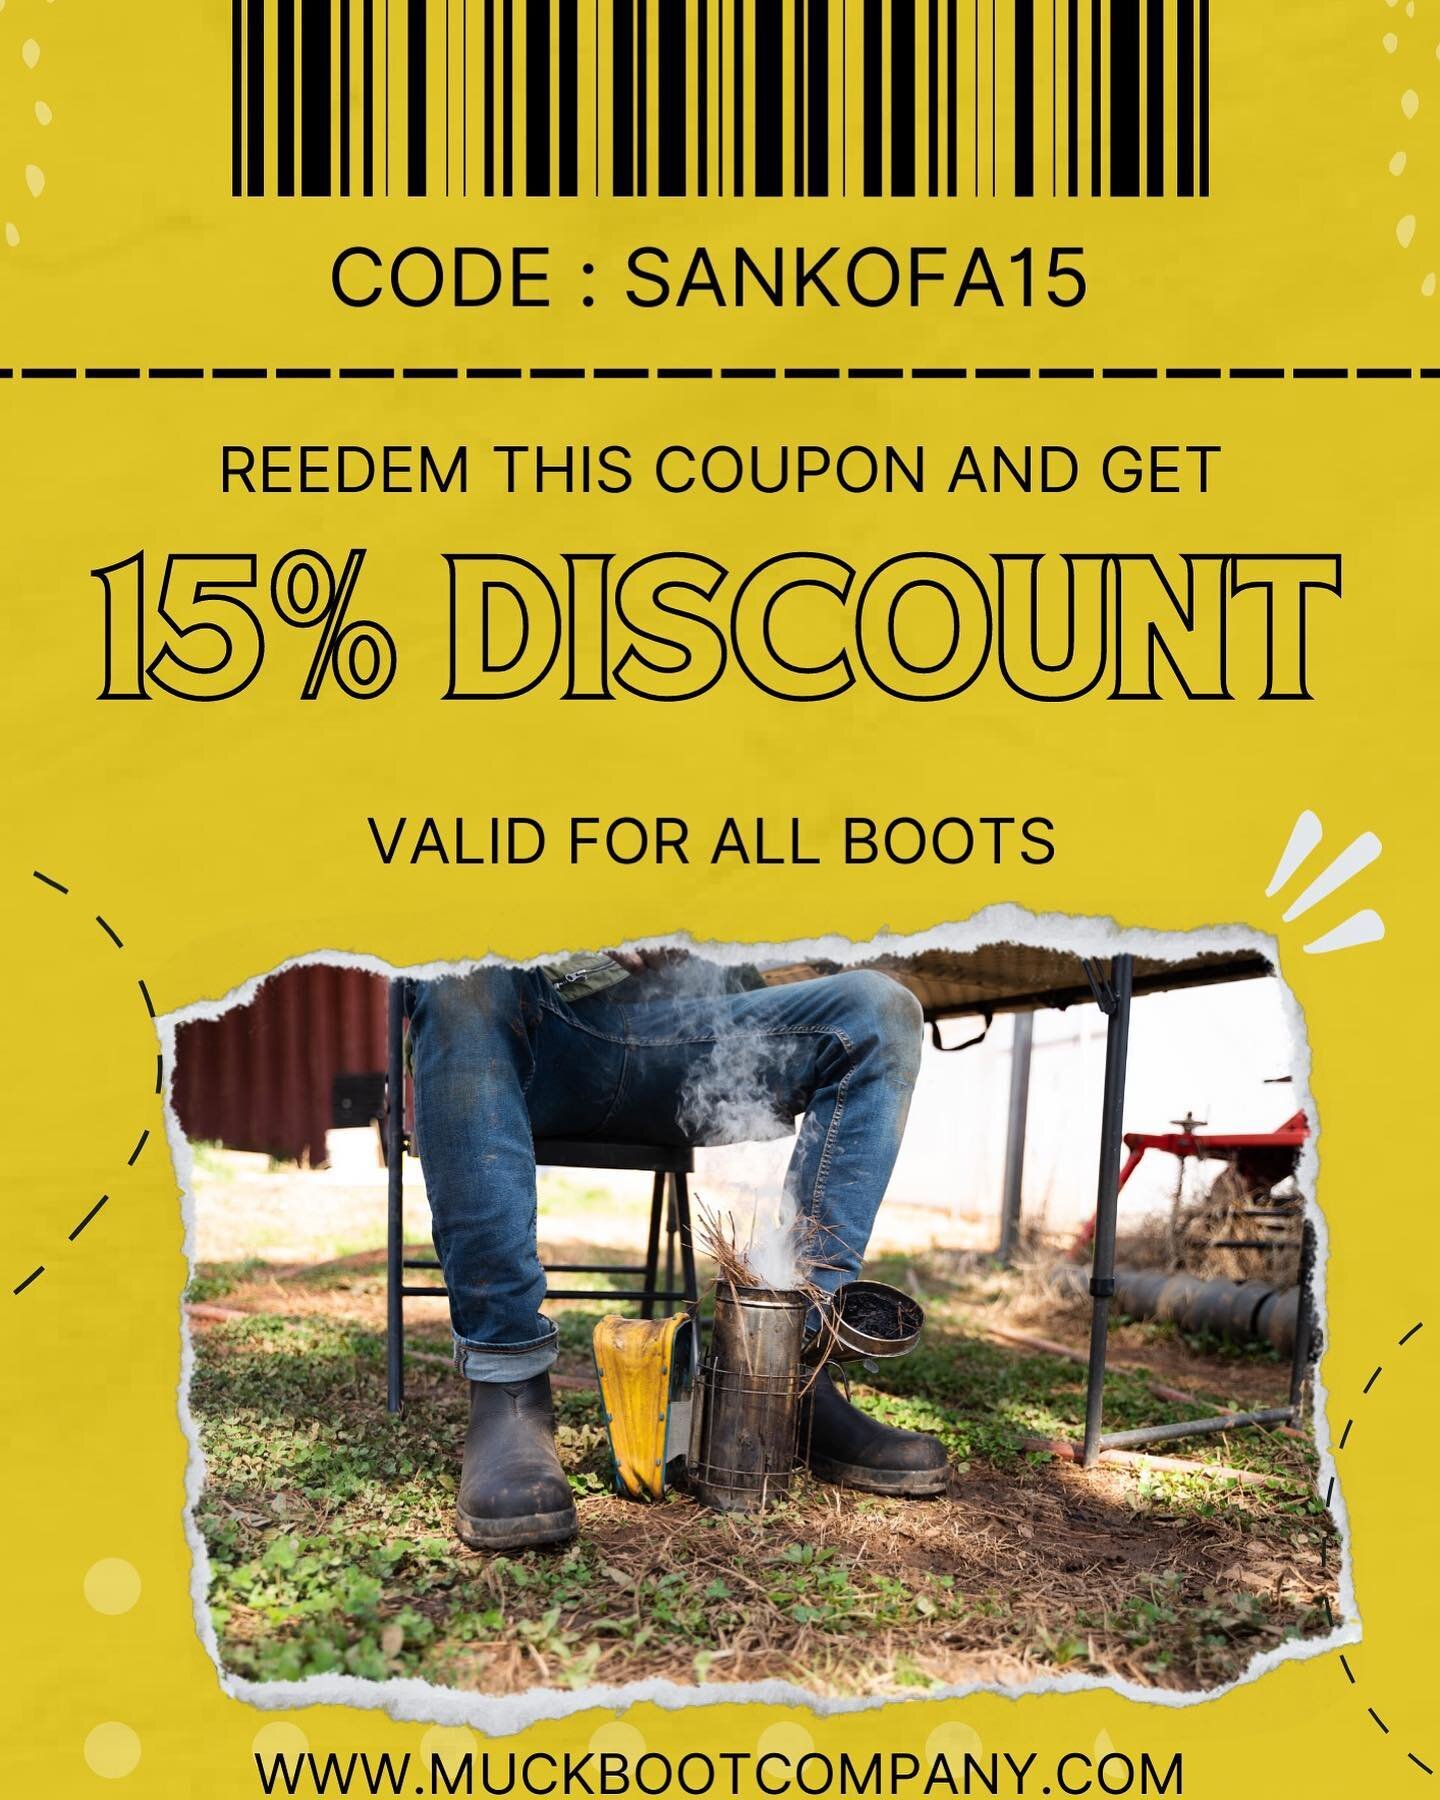 Head over to @muckbootco &lsquo;s website to get a 15% off discount! Valid for all boots! ☺️